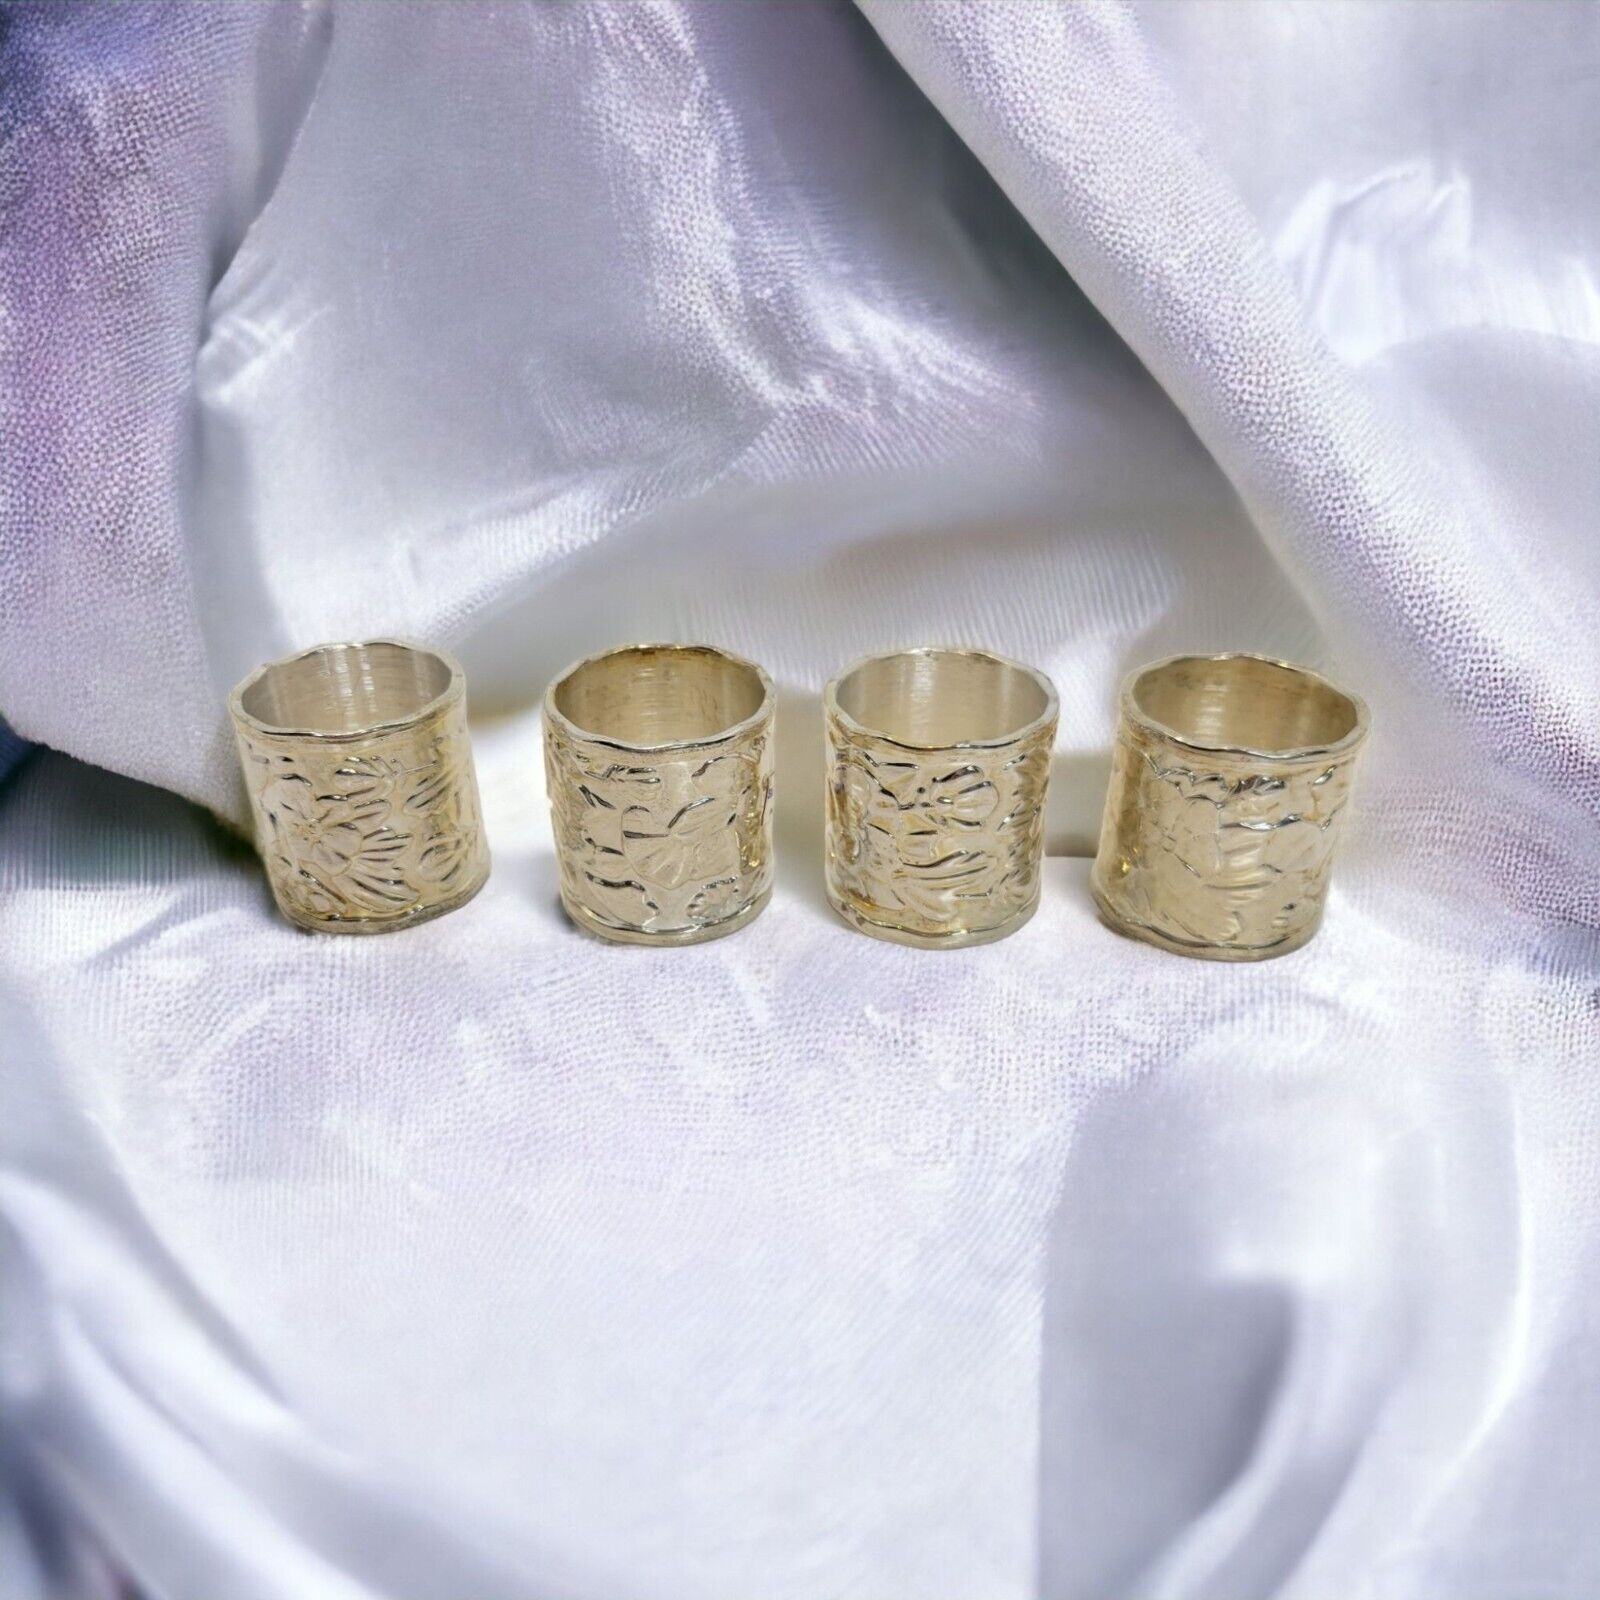 Set of 4 Silver Plated Napkin Rings Etched Floral Design Dining Kitchen